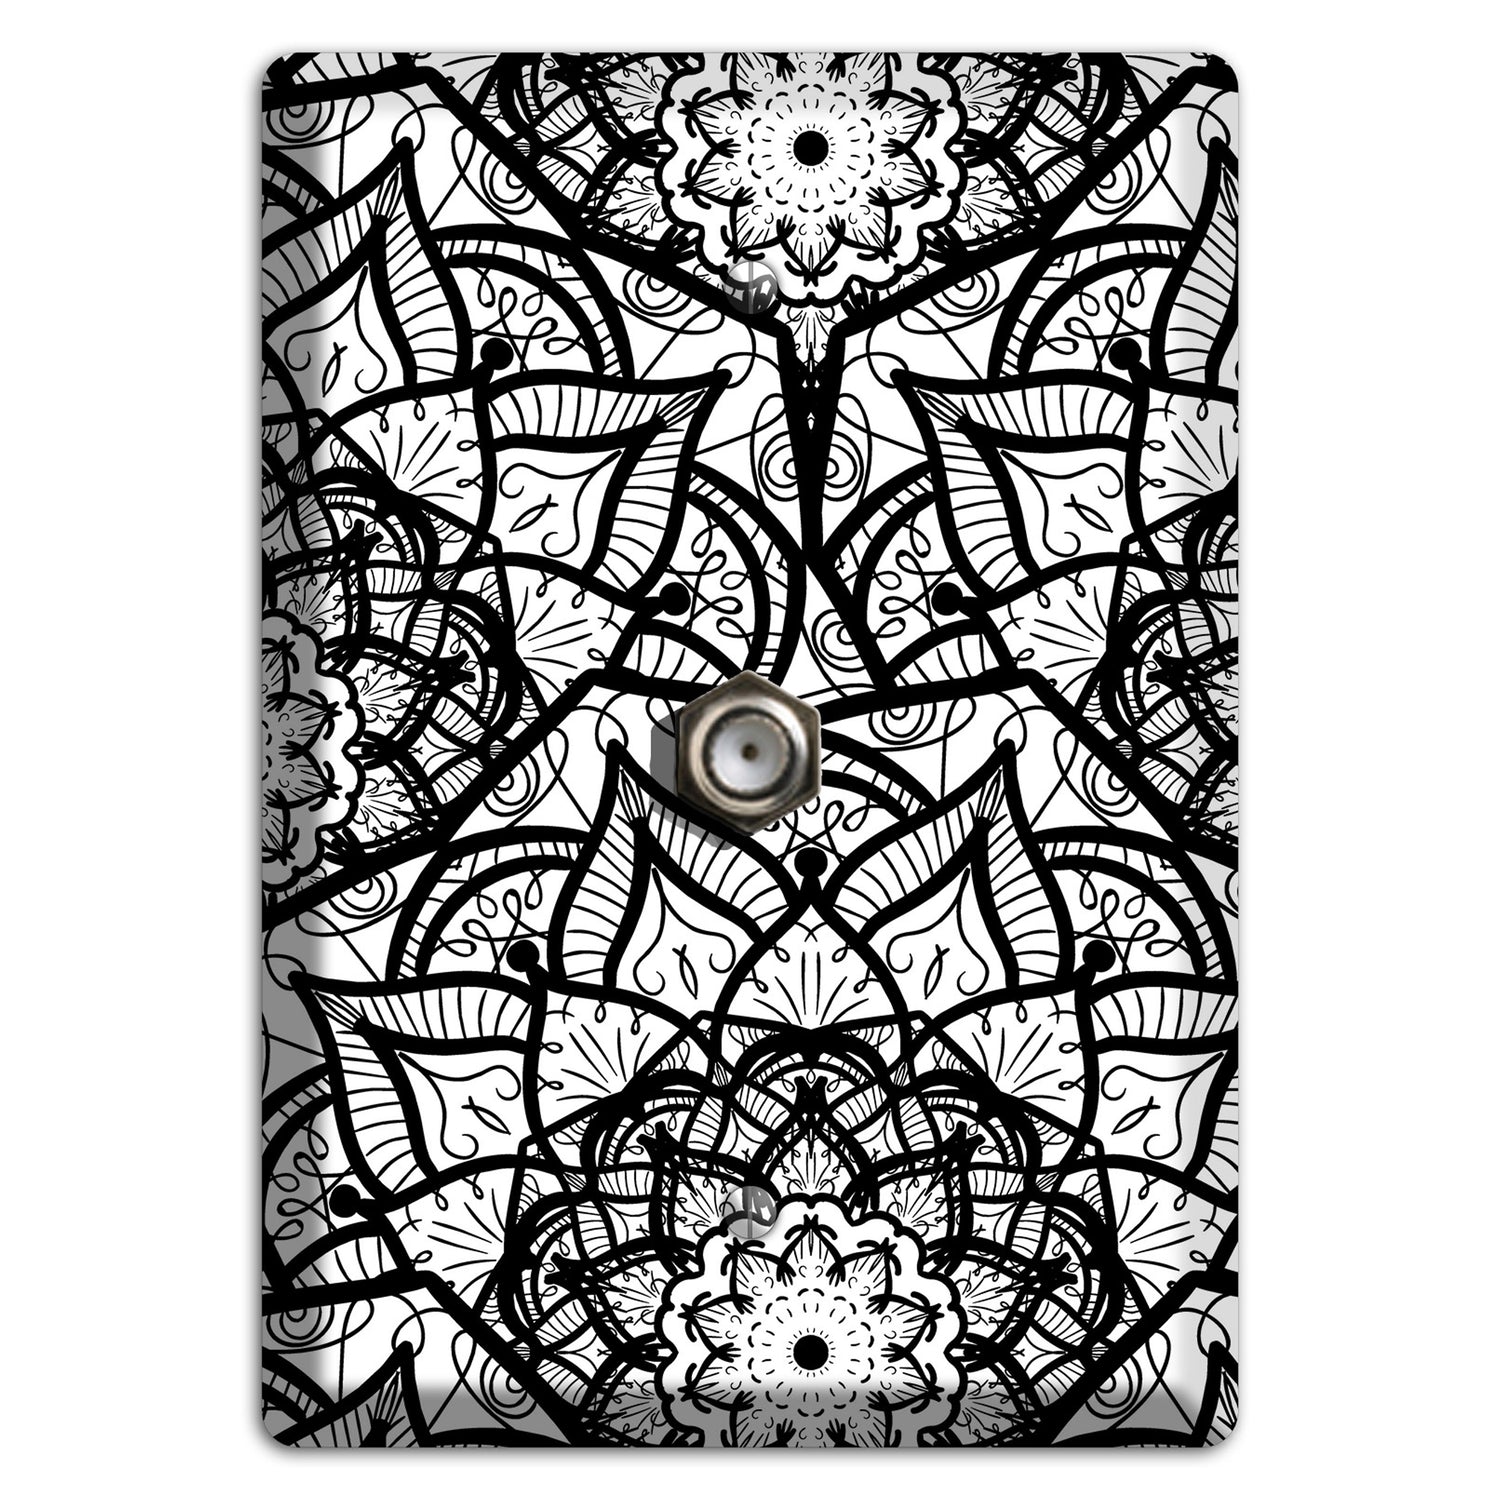 Mandala Black and White Style U Cover Plates Cable Wallplate